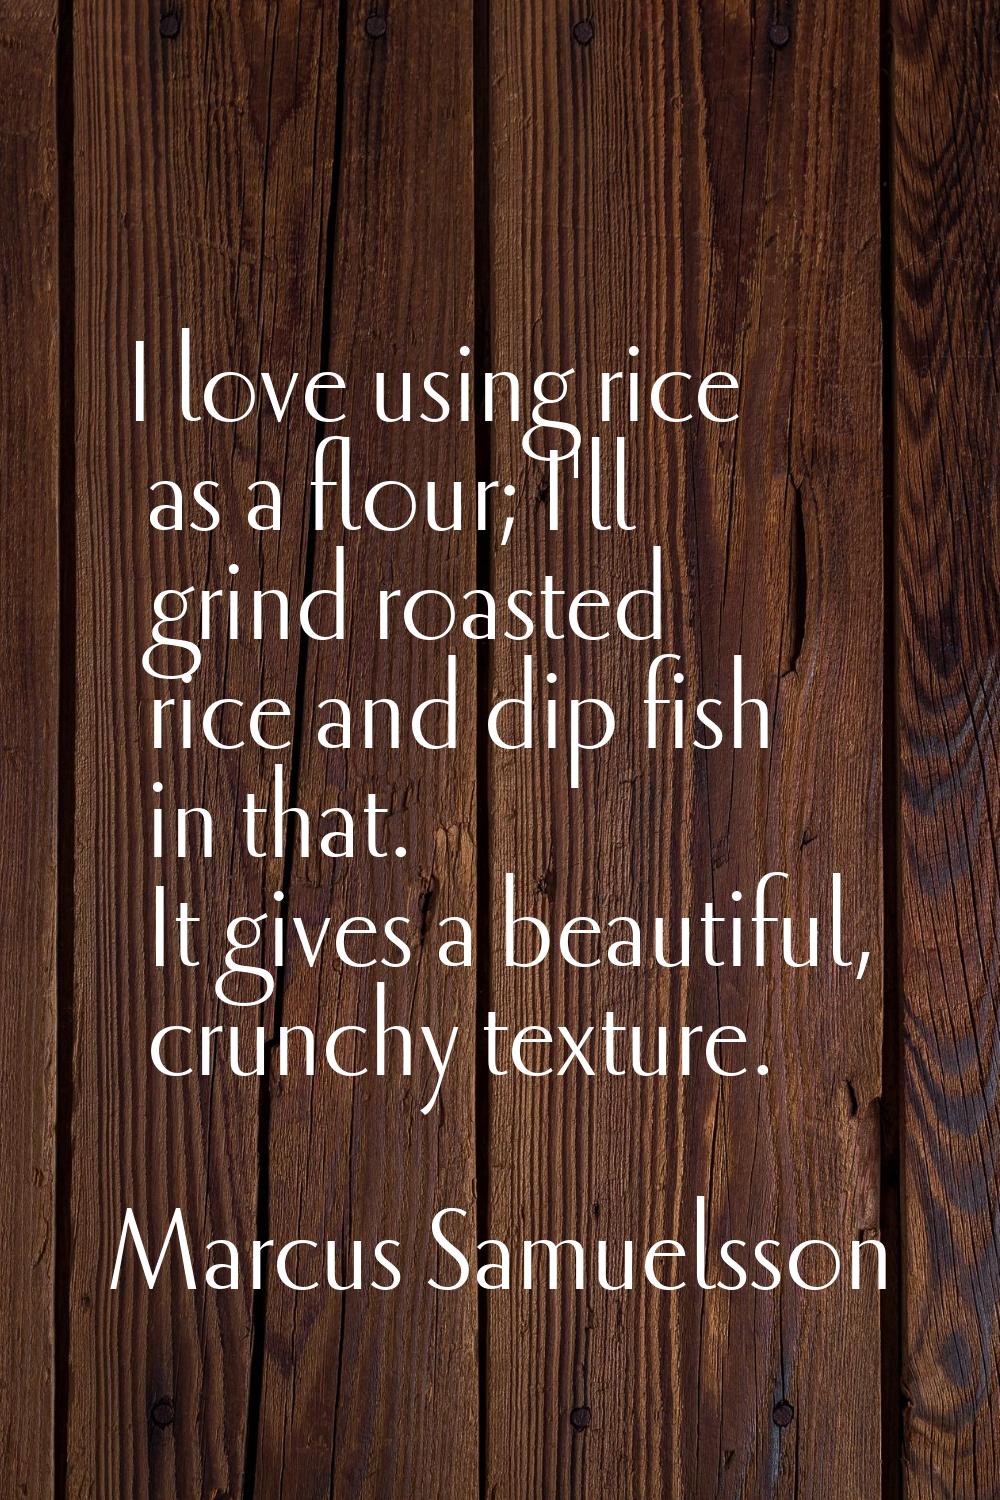 I love using rice as a flour; I'll grind roasted rice and dip fish in that. It gives a beautiful, c